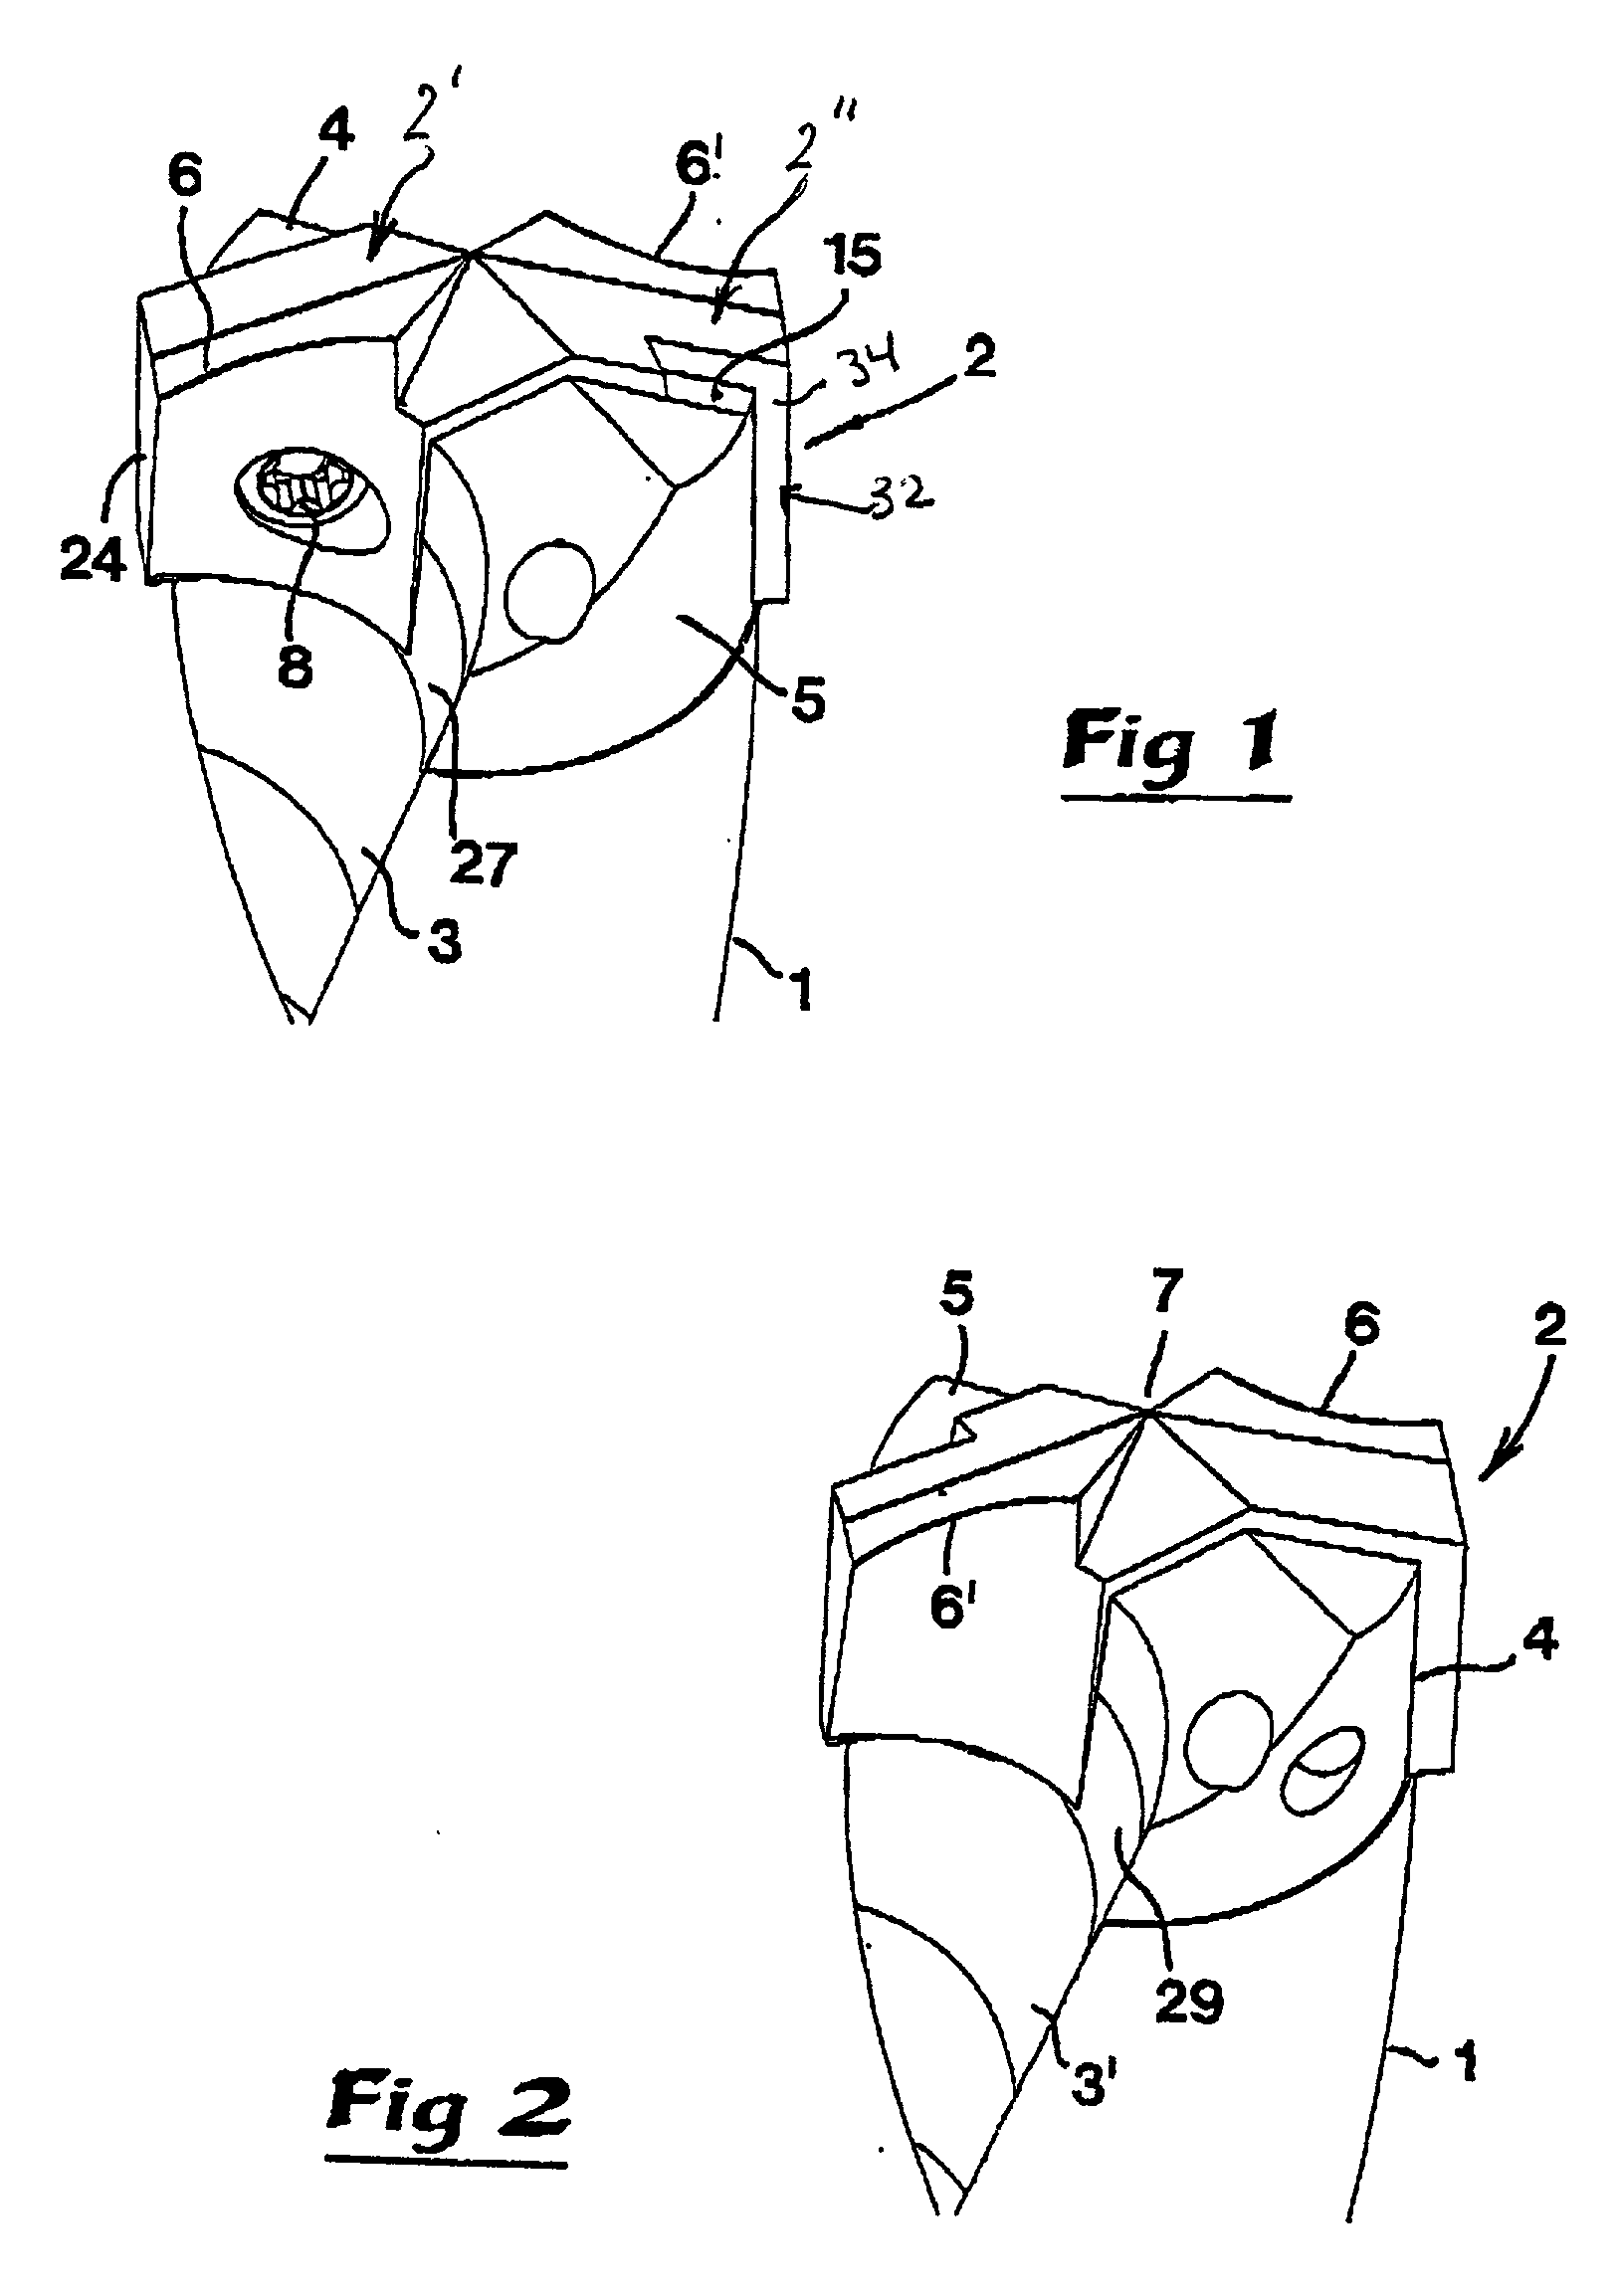 Drilling tool including a shank and a cutting body detachably secured thereto